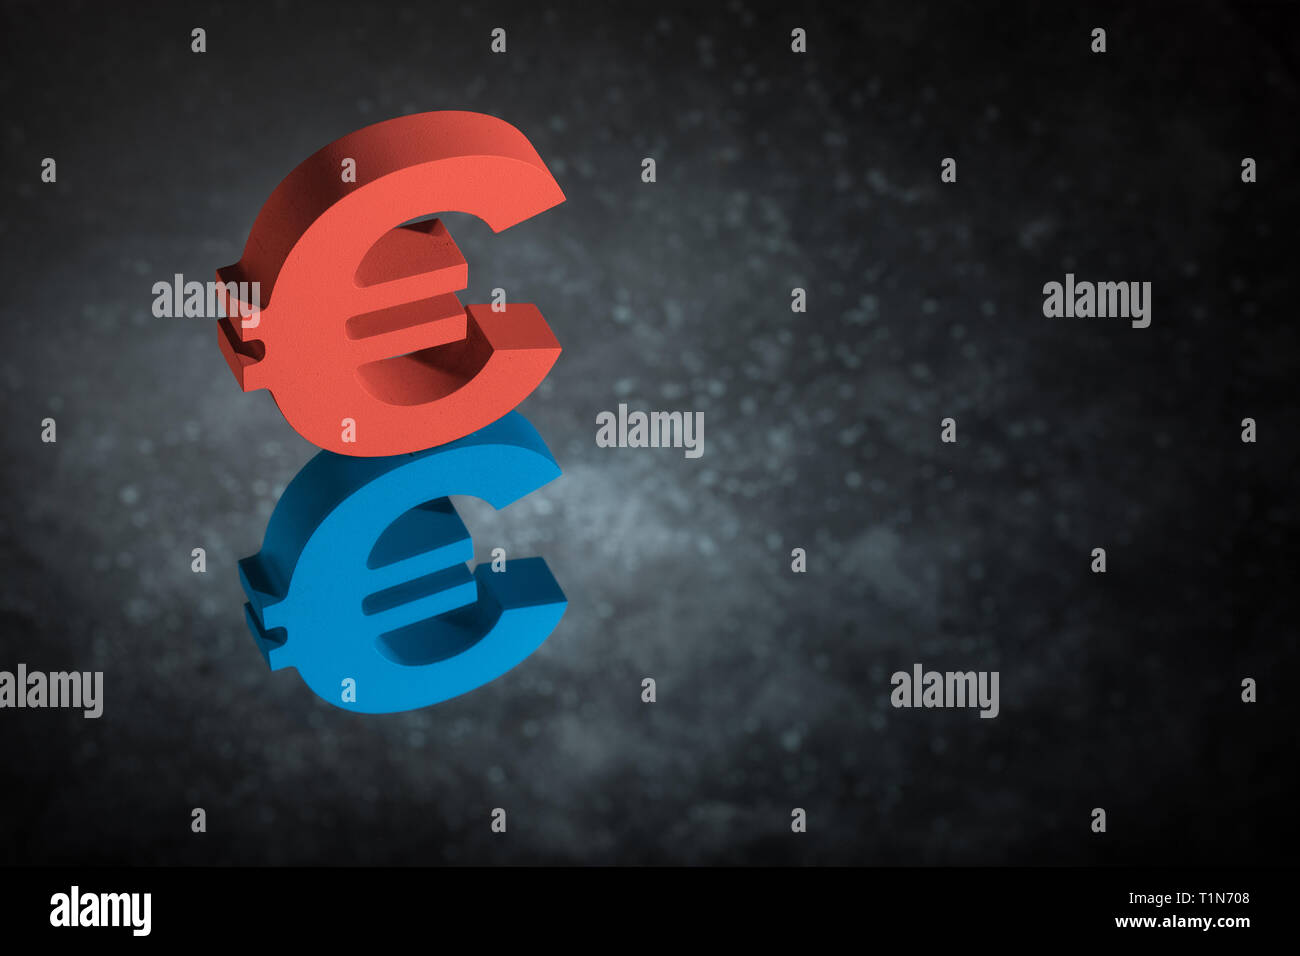 Red and Blue European Currency Symbol or Sign Euro With Mirror Reflection on Dark Dusty Background Stock Photo